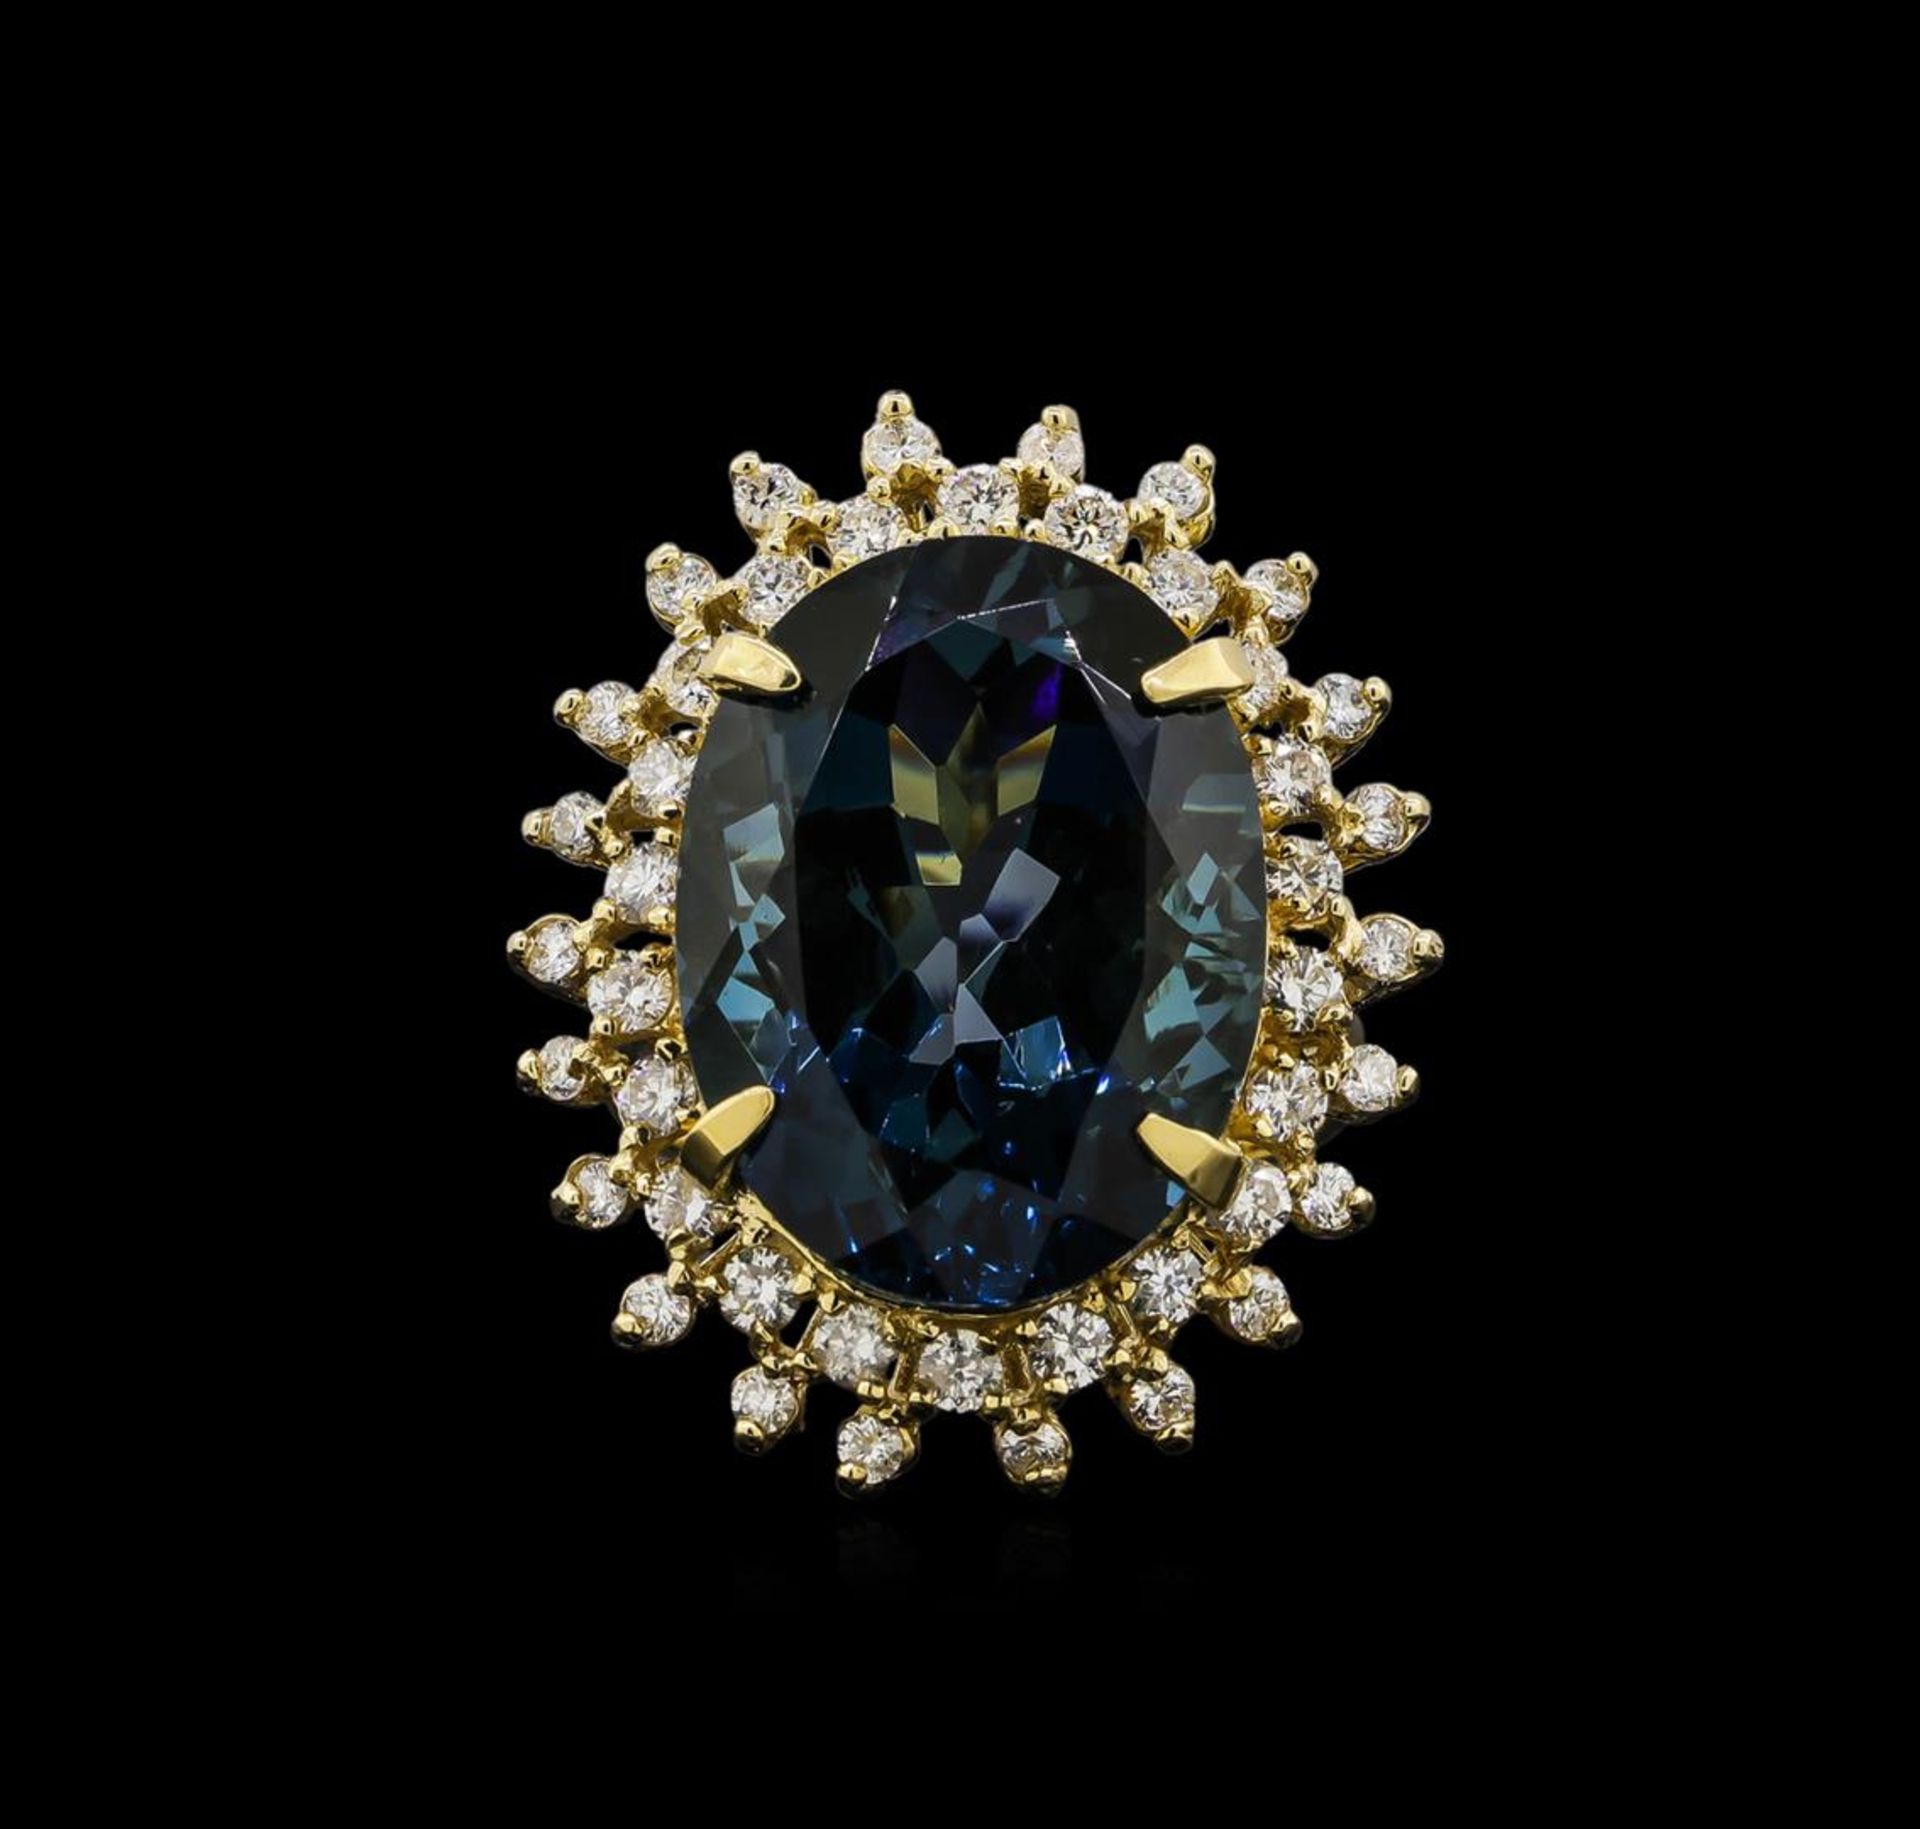 14KT Yellow Gold 22.70 ctw Topaz and Diamond Ring - Image 2 of 5